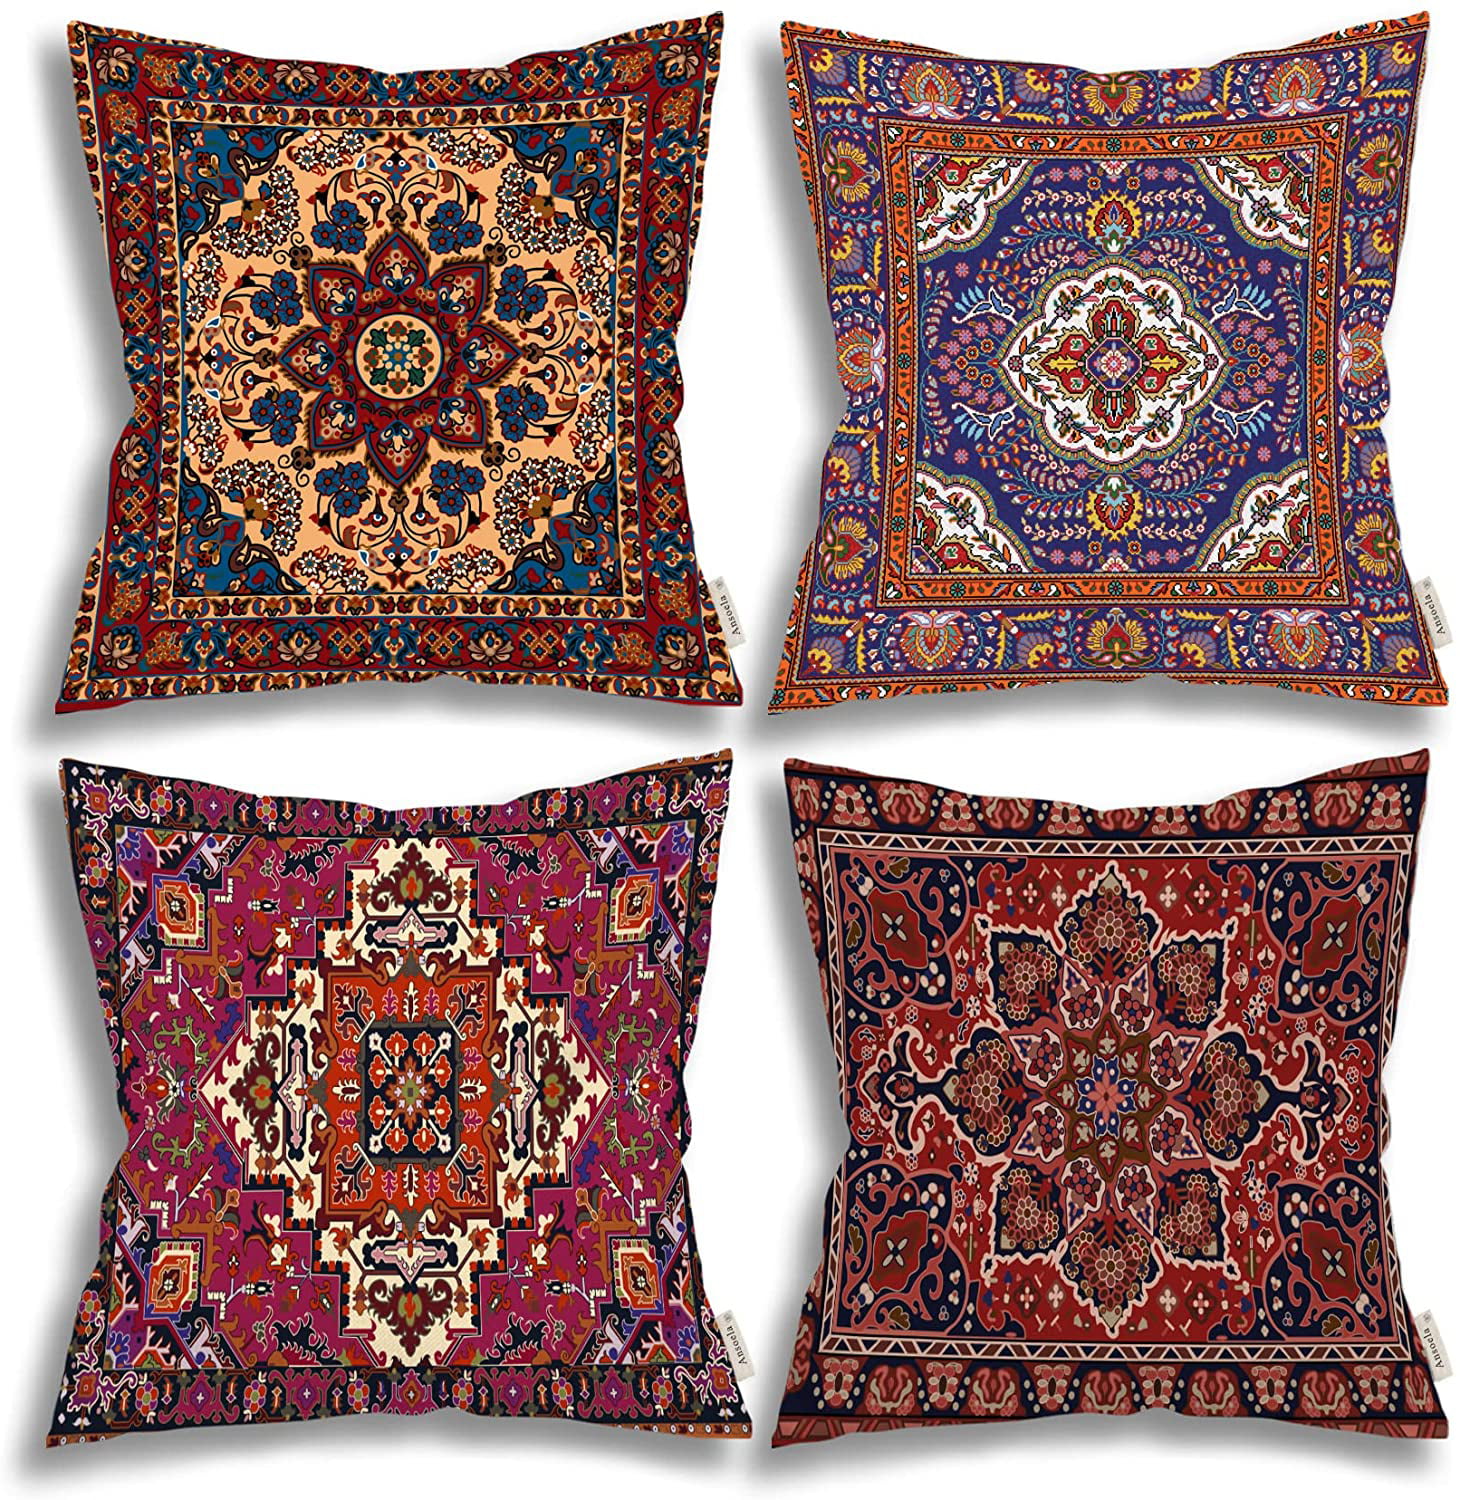 17.32x17.32 turkish pillow brown pillow cover vintage rug pillow cushion red turkish cushion square kilim pillow etnic couch pillow